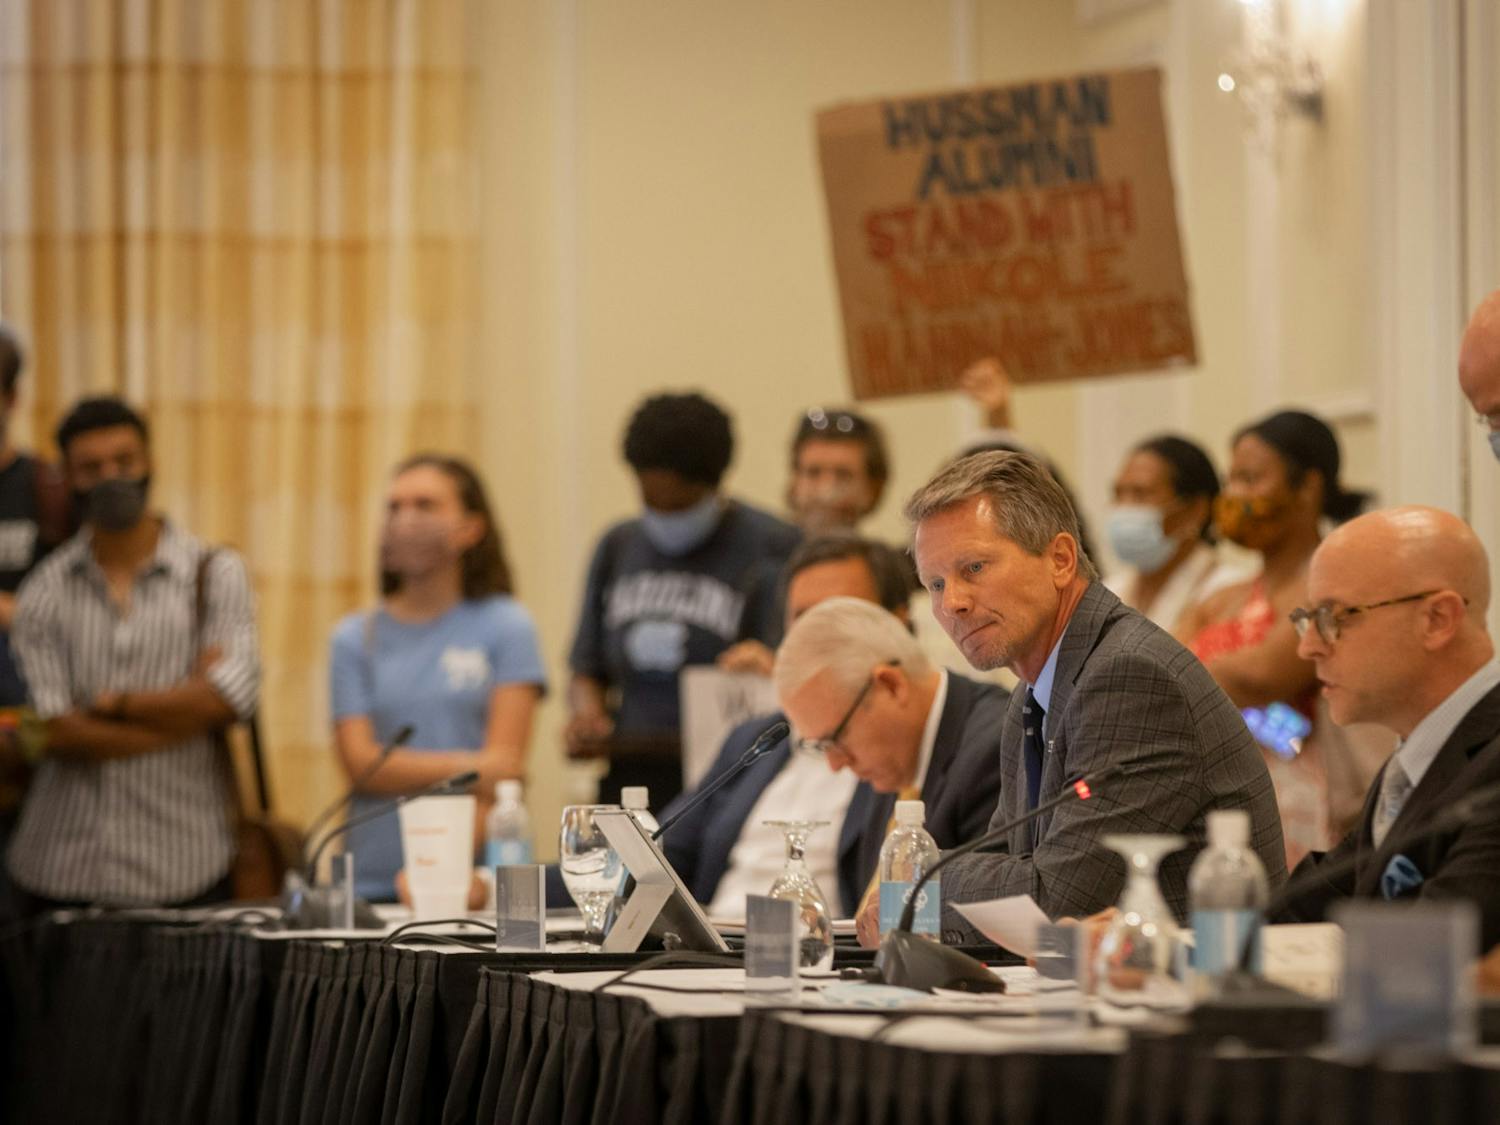 UNC Chancellor Kevin Guskiewicz looks away from protesters after the Wednesday, June 30, 2021, Board of Trustees meeting during which the Board voted to grant tenure to Nikole Hannah-Jones.